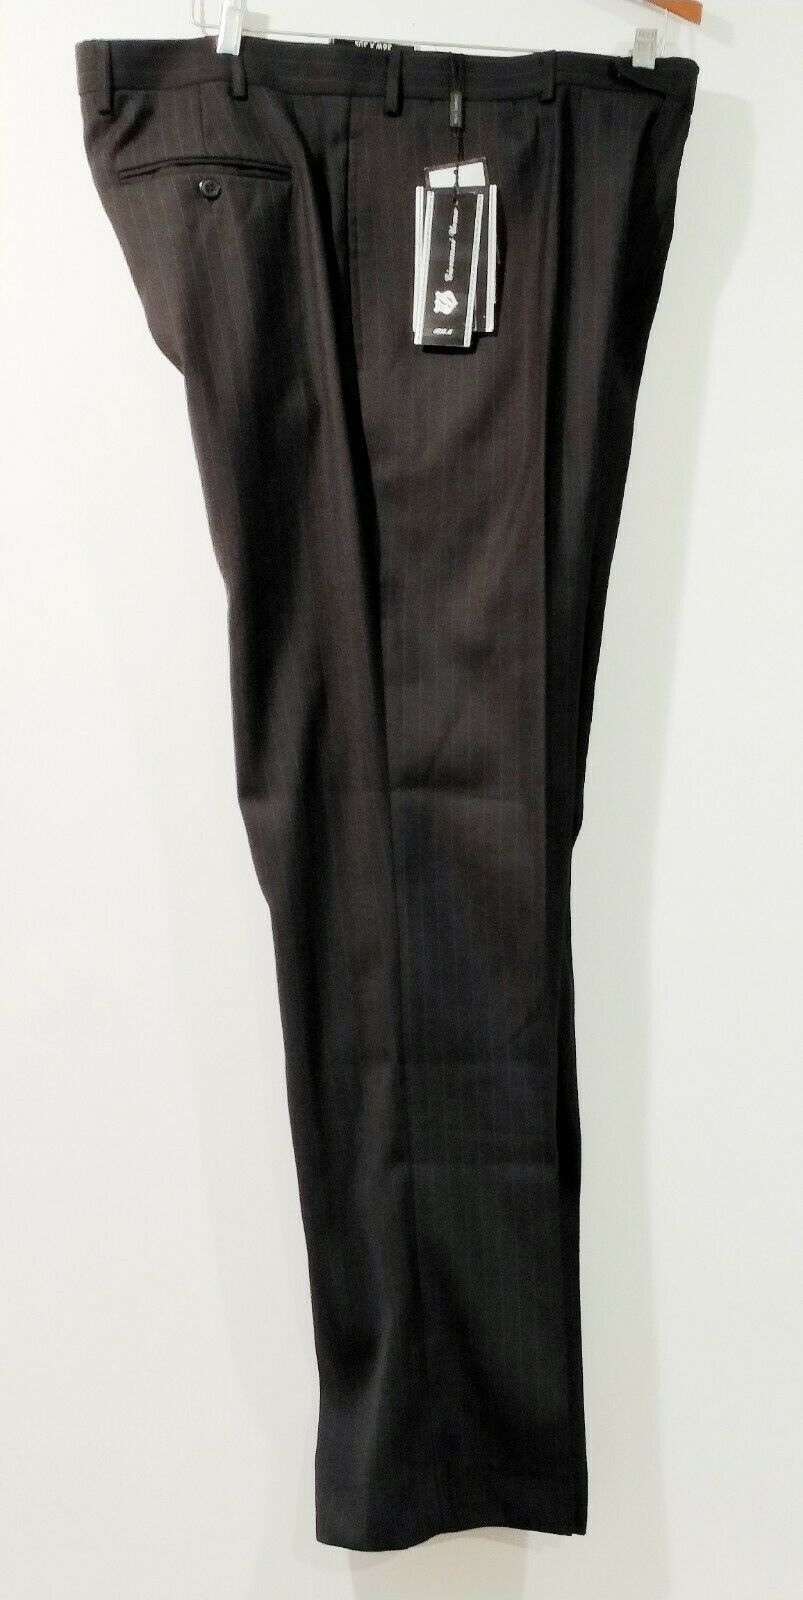 NWT Men Dress Pants by Signature Collection Size 22 / 32 inseam 36 1/2 Black